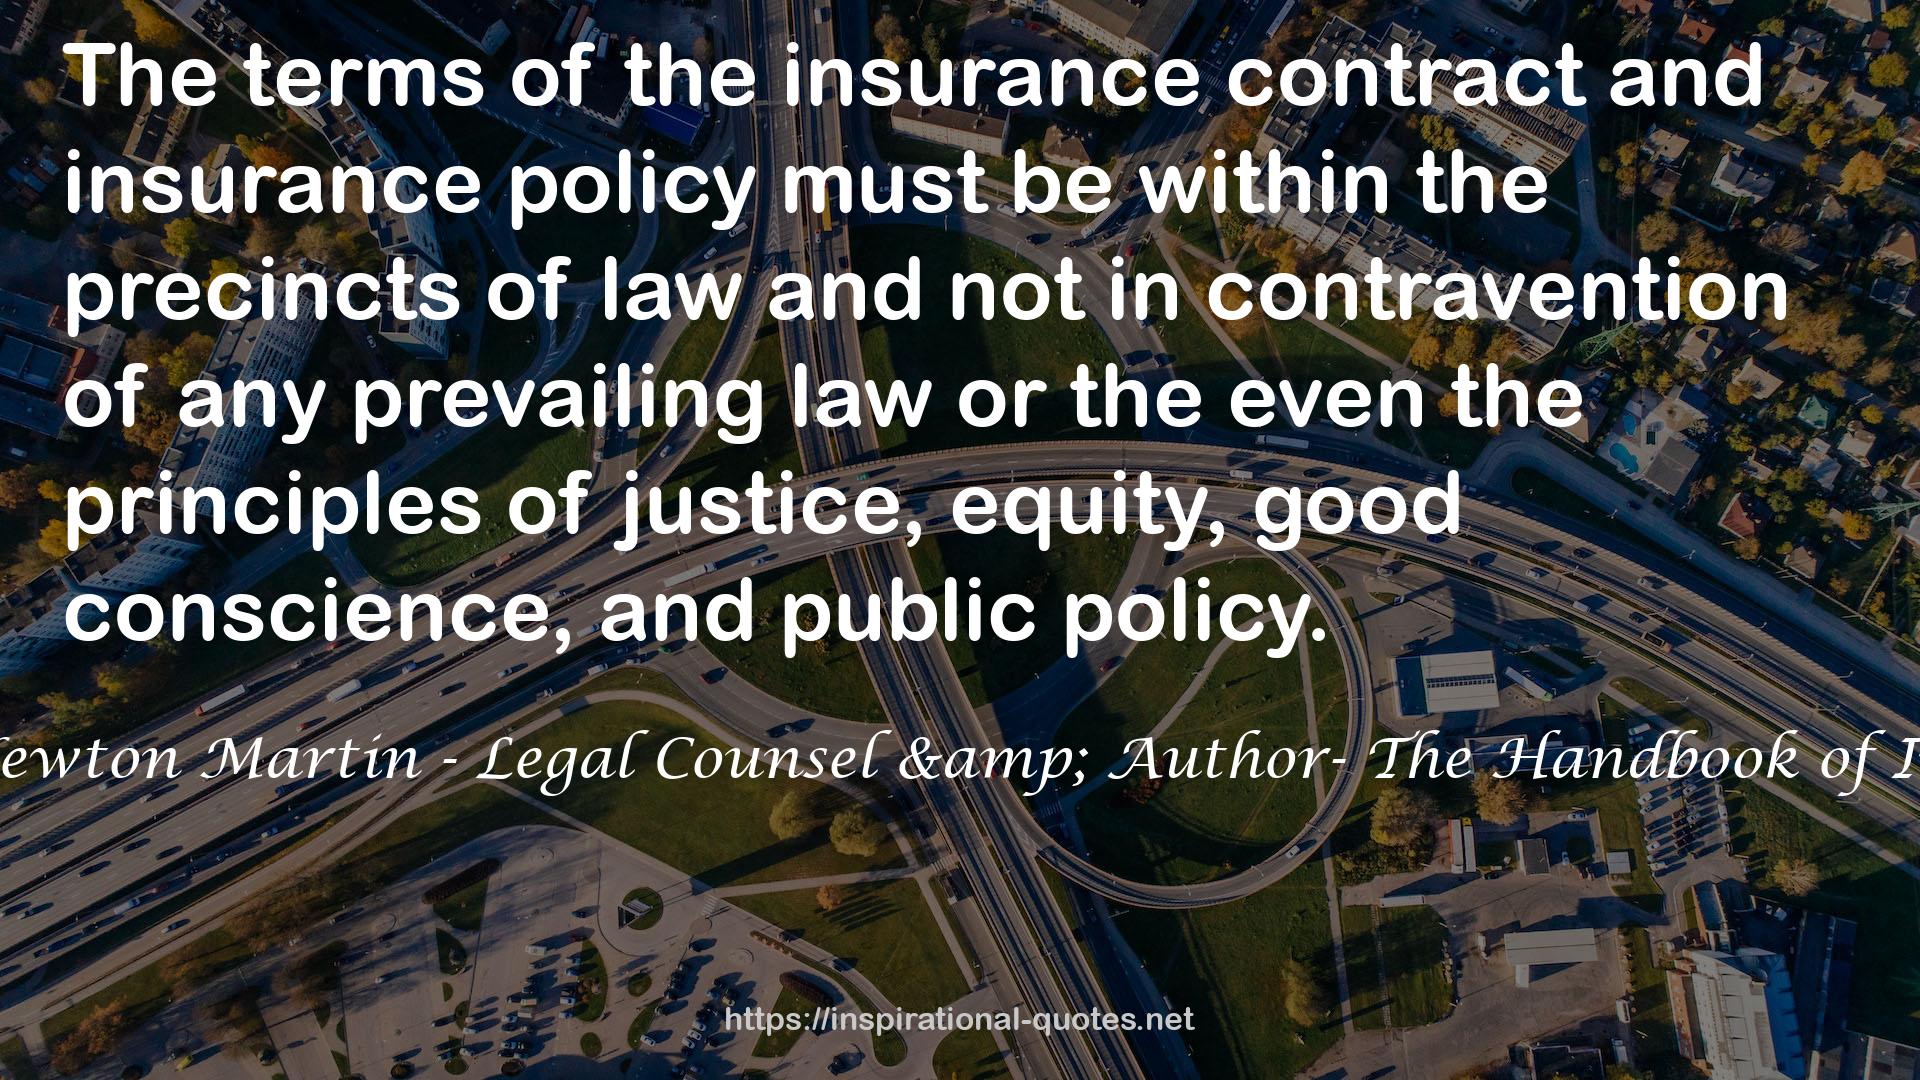 Henrietta Newton Martin - Legal Counsel & Author- The Handbook of Insurance Law QUOTES